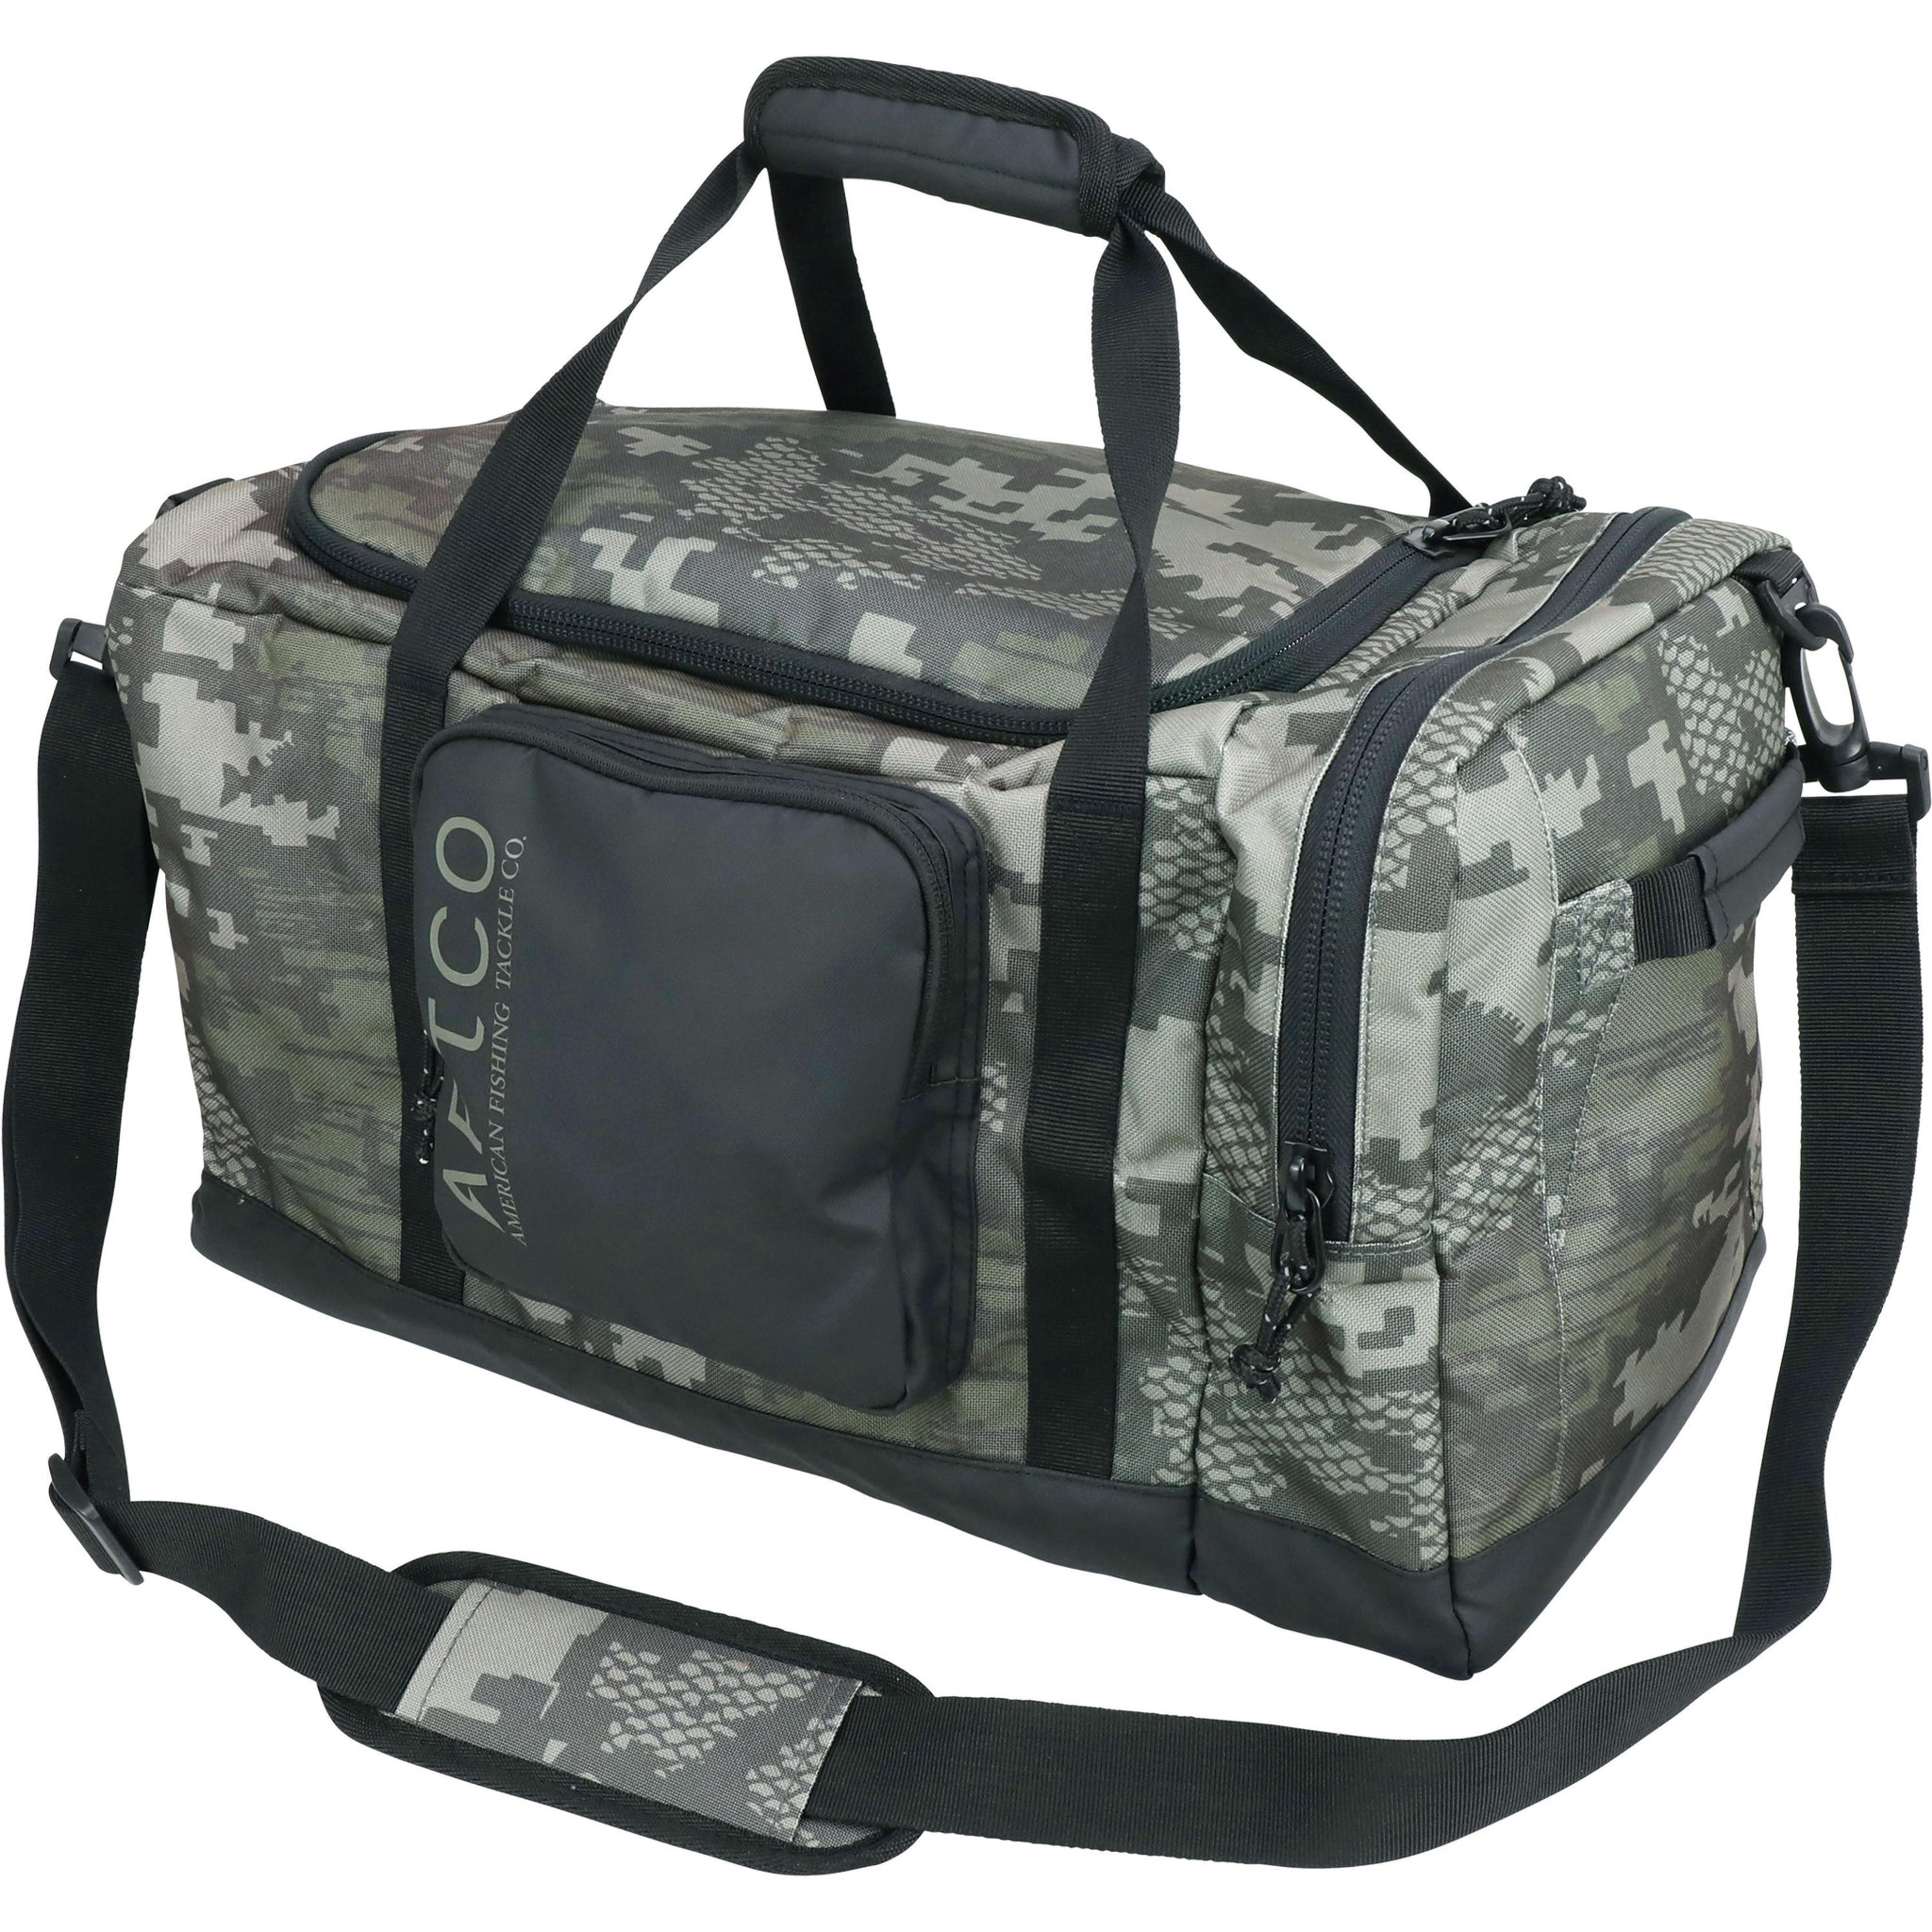 Accessories - Tackle Bags/Boxes: Fishermans Ideal Supply House